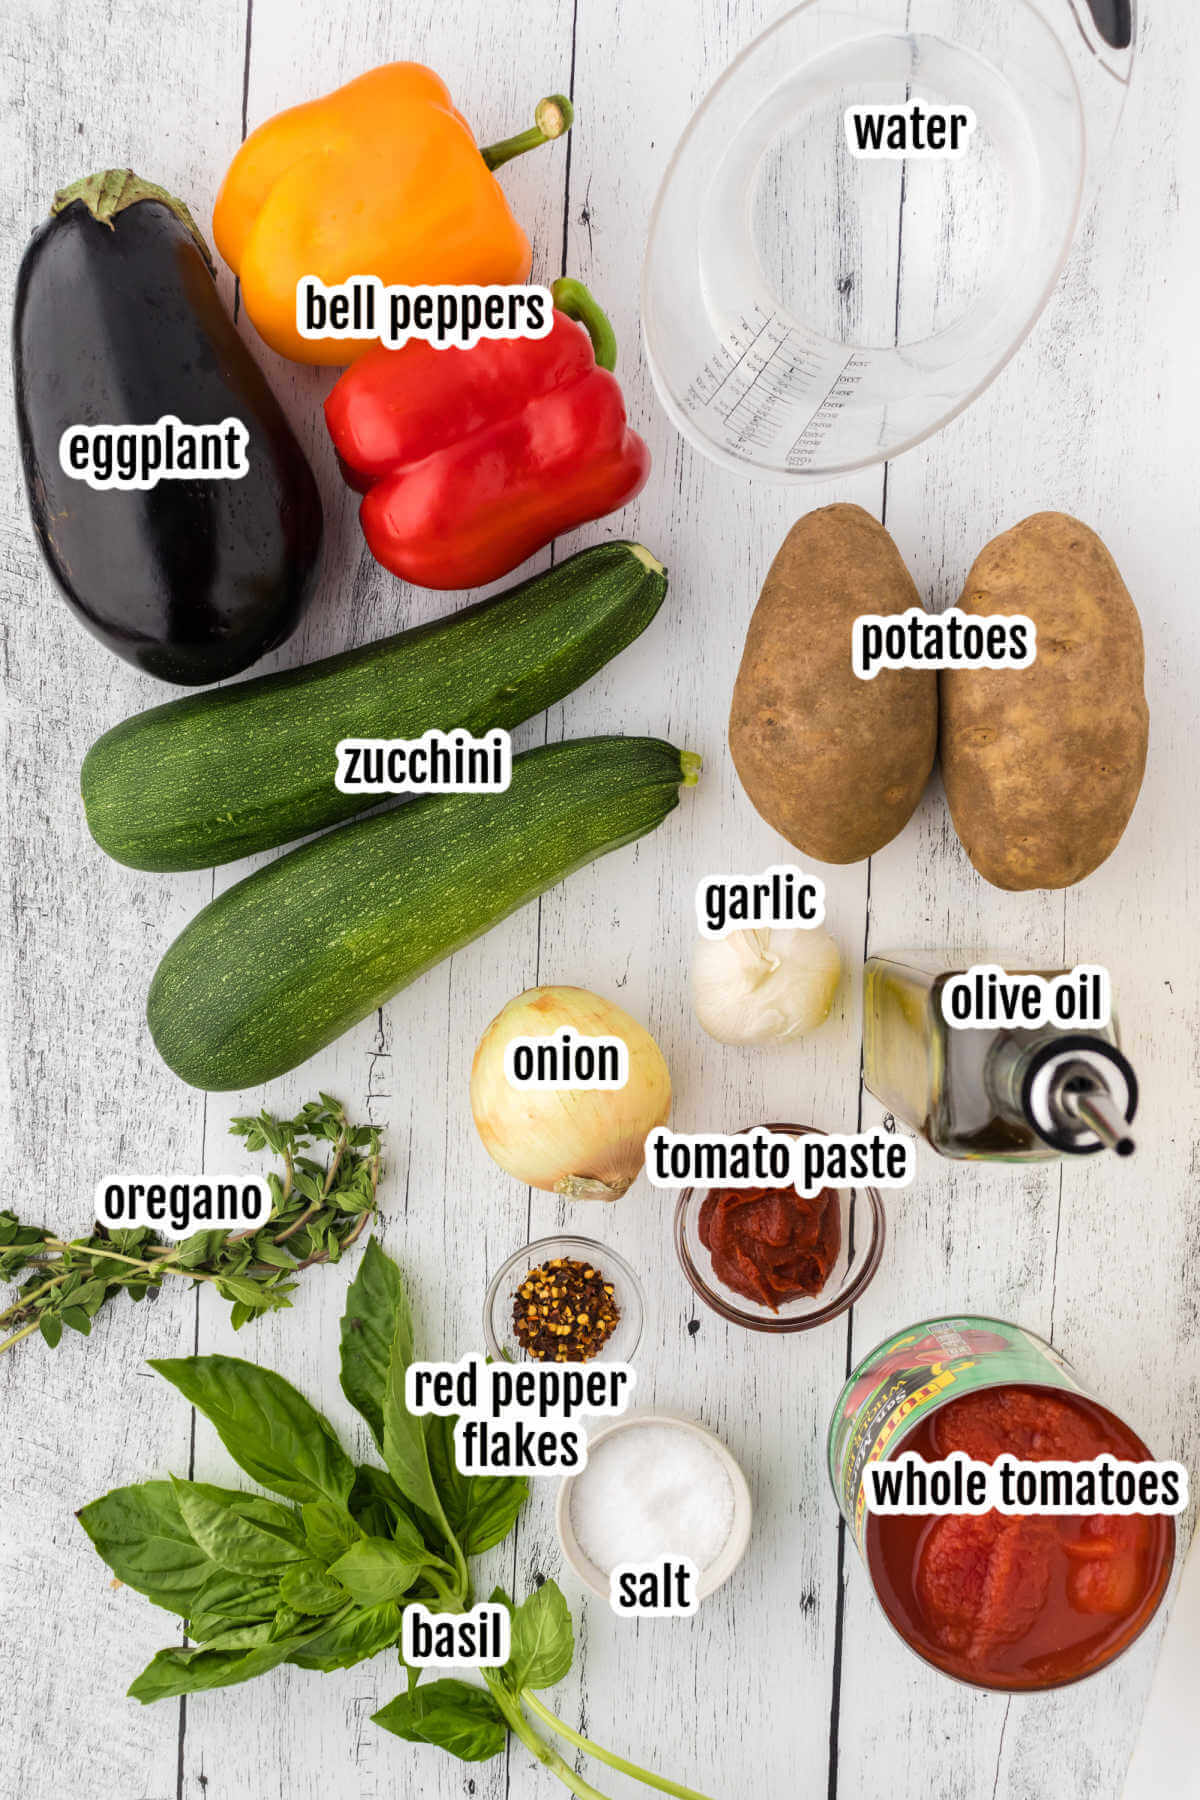 Image of the ingredients needed to make the Italian ciambotta stew.